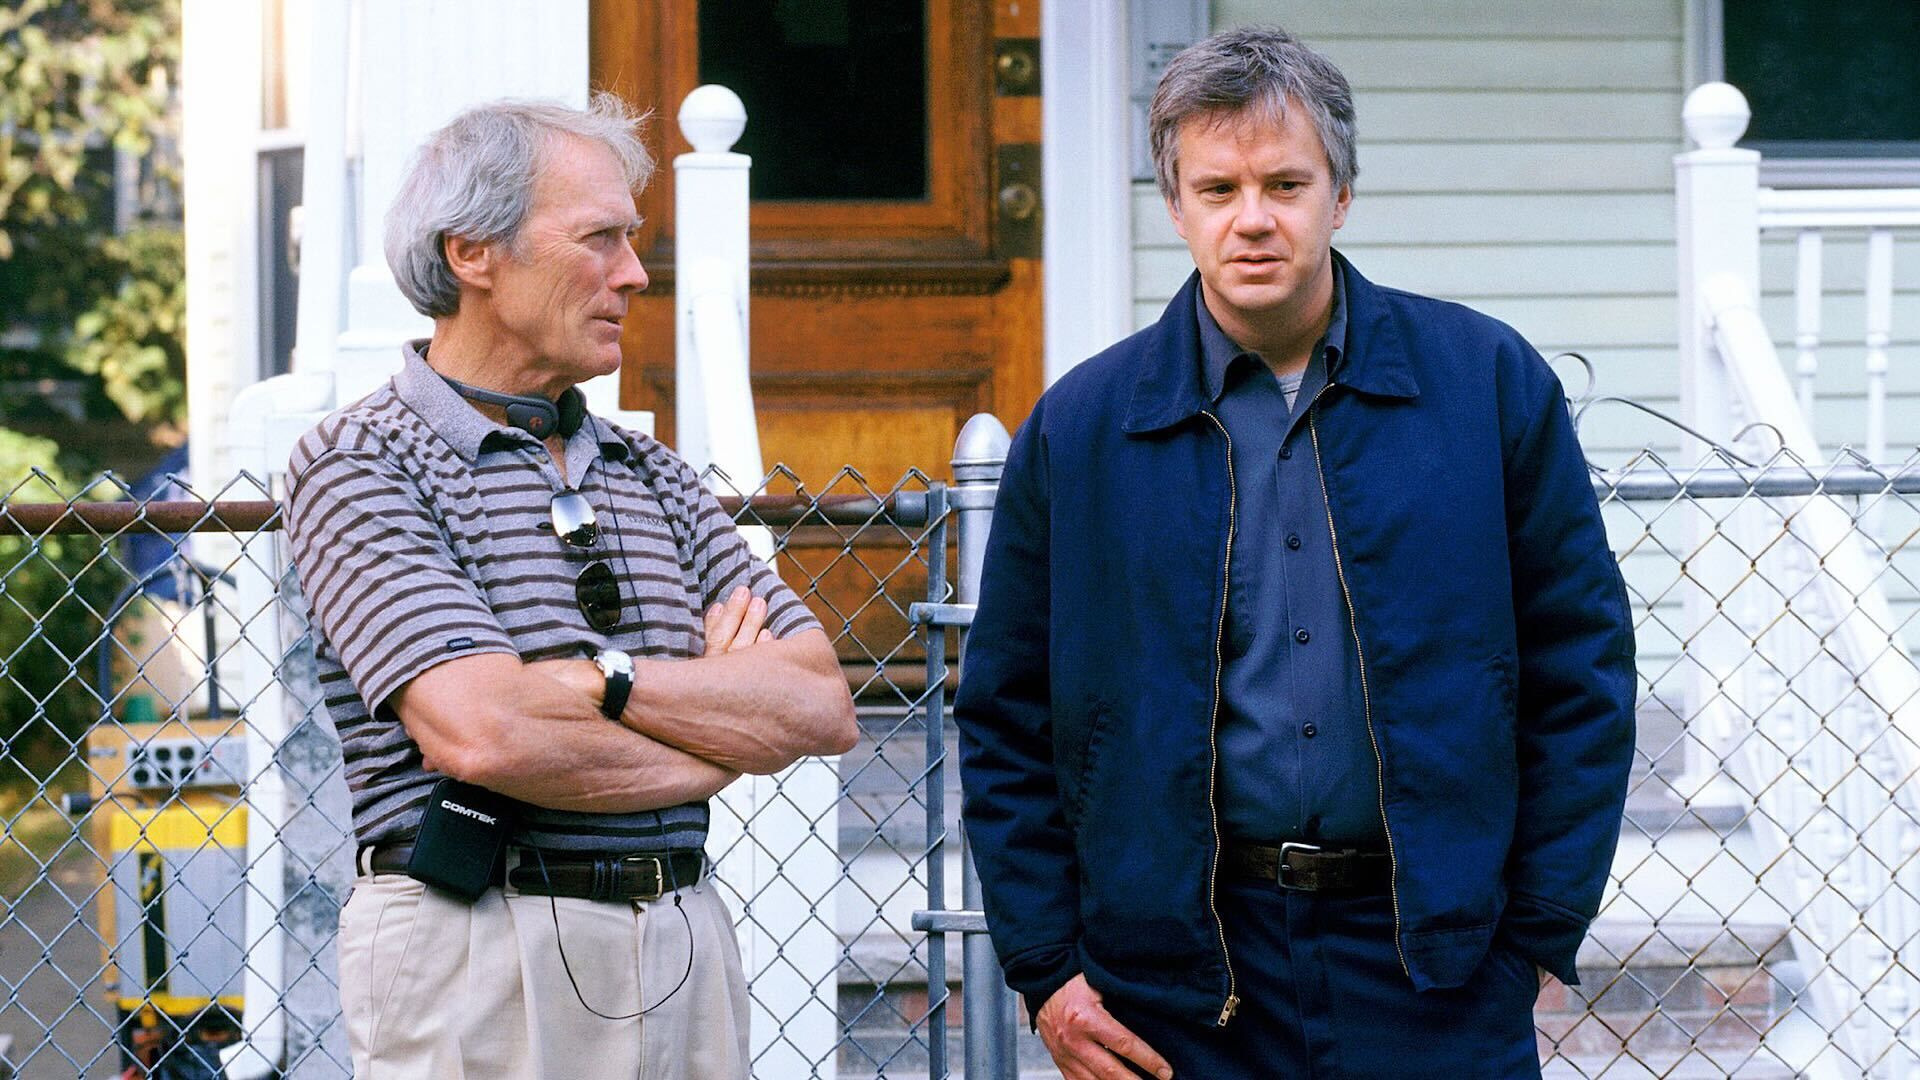 Tim Robbins chatting with Clint Eastwood on Mystic River set